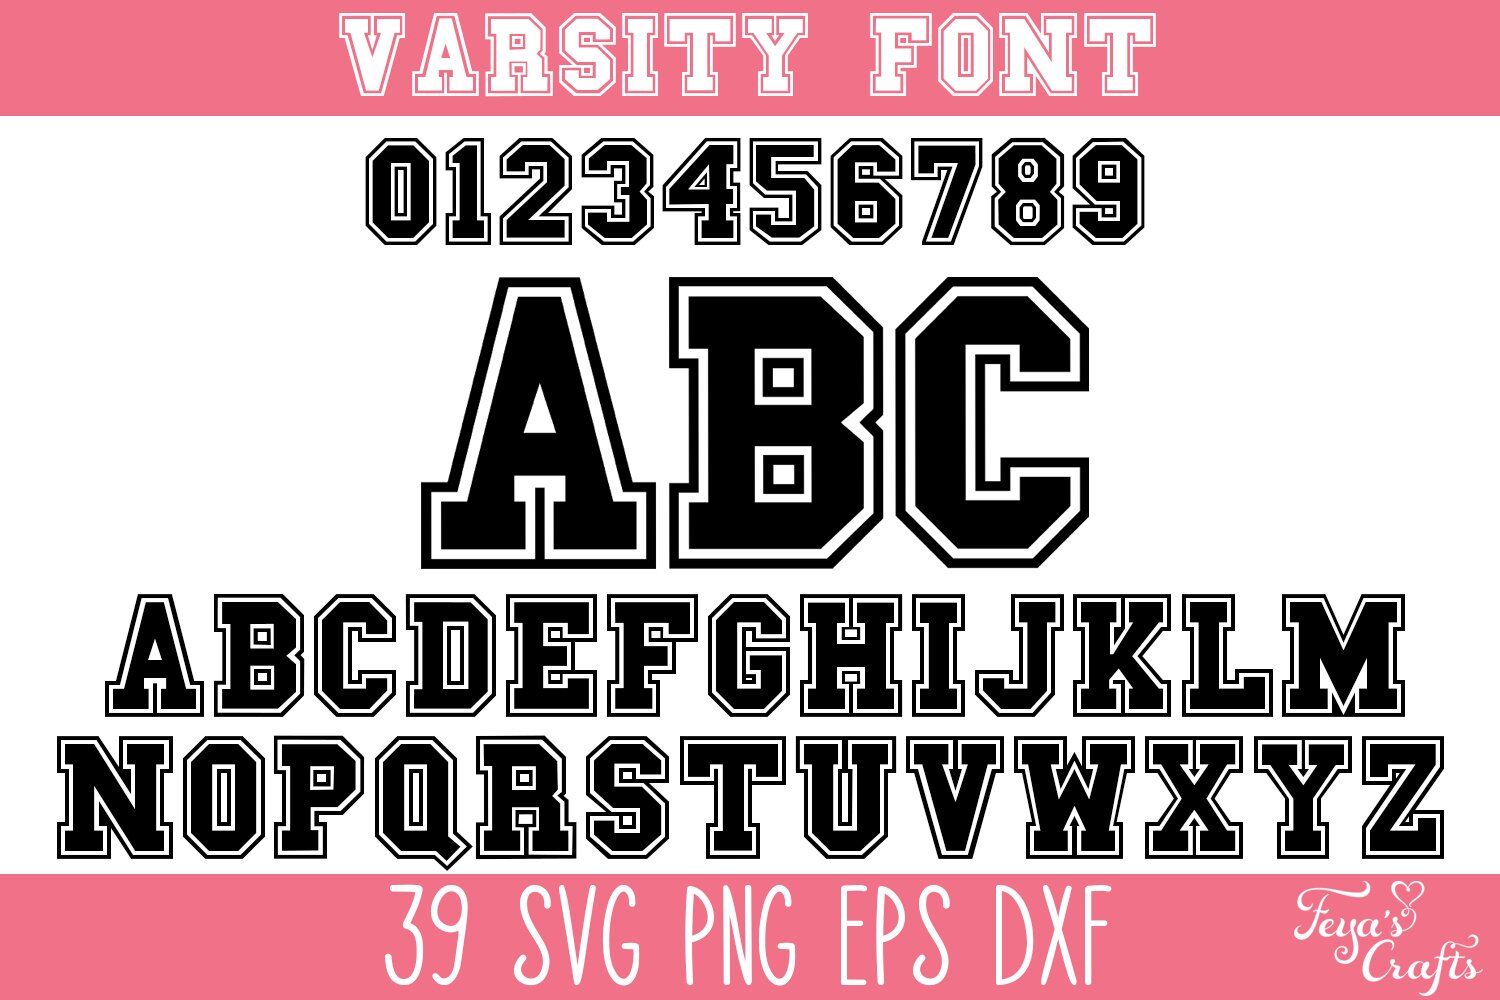 Basketball Team Name and Number SVG By Anastasia Feya Fonts & SVG Cut Files